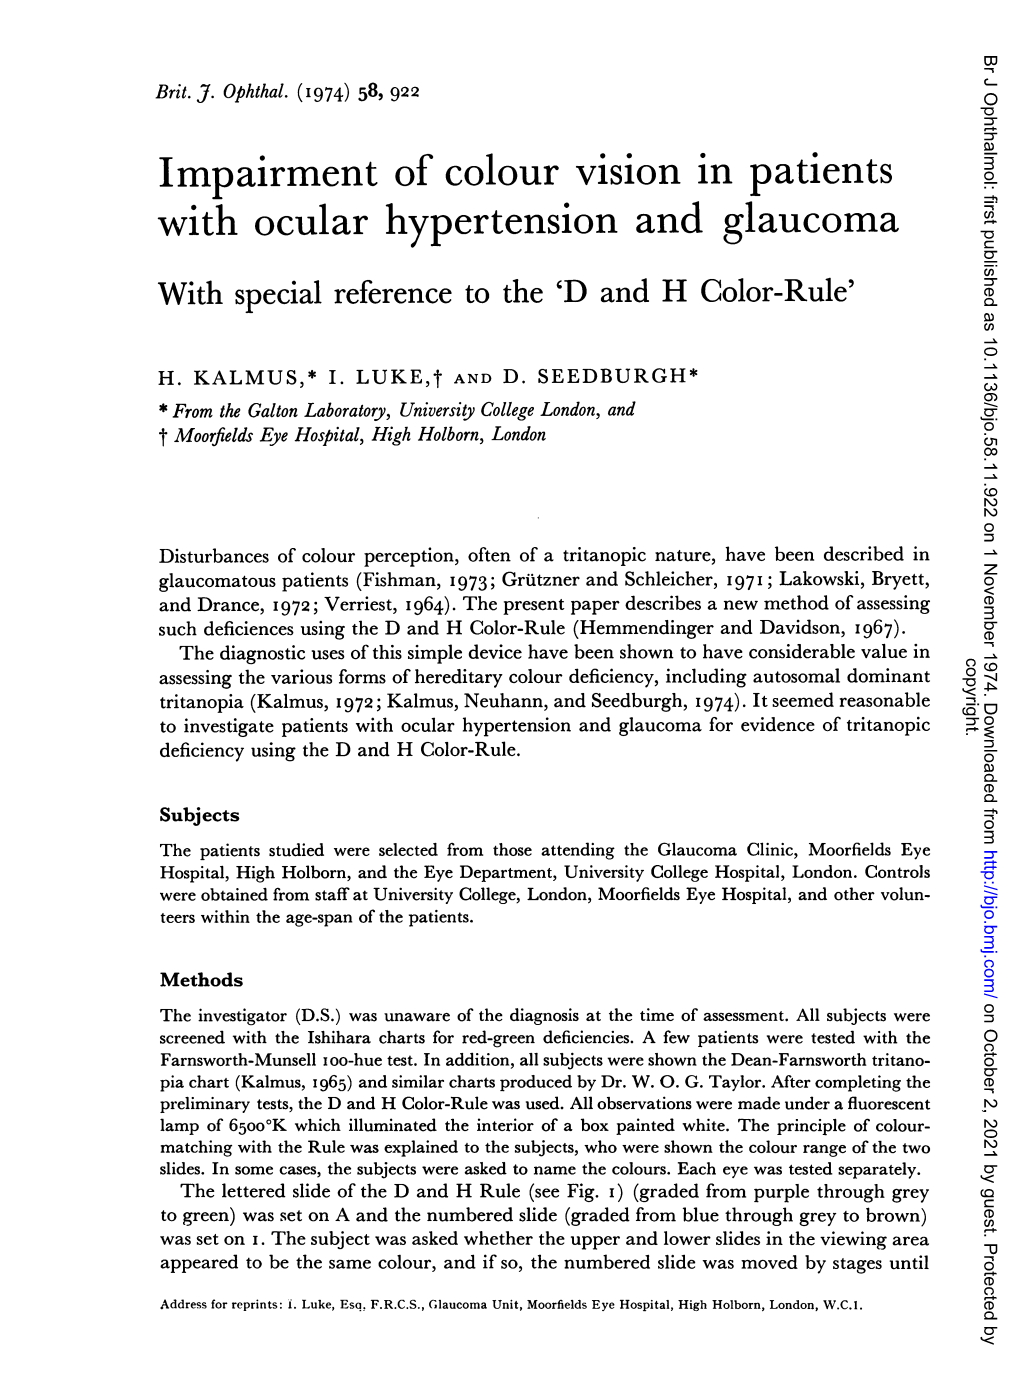 Impairment of Colour Vision in Patients with Ocular Hypertension and Glaucoma with Special Reference to the 'D and H Color-Rule'